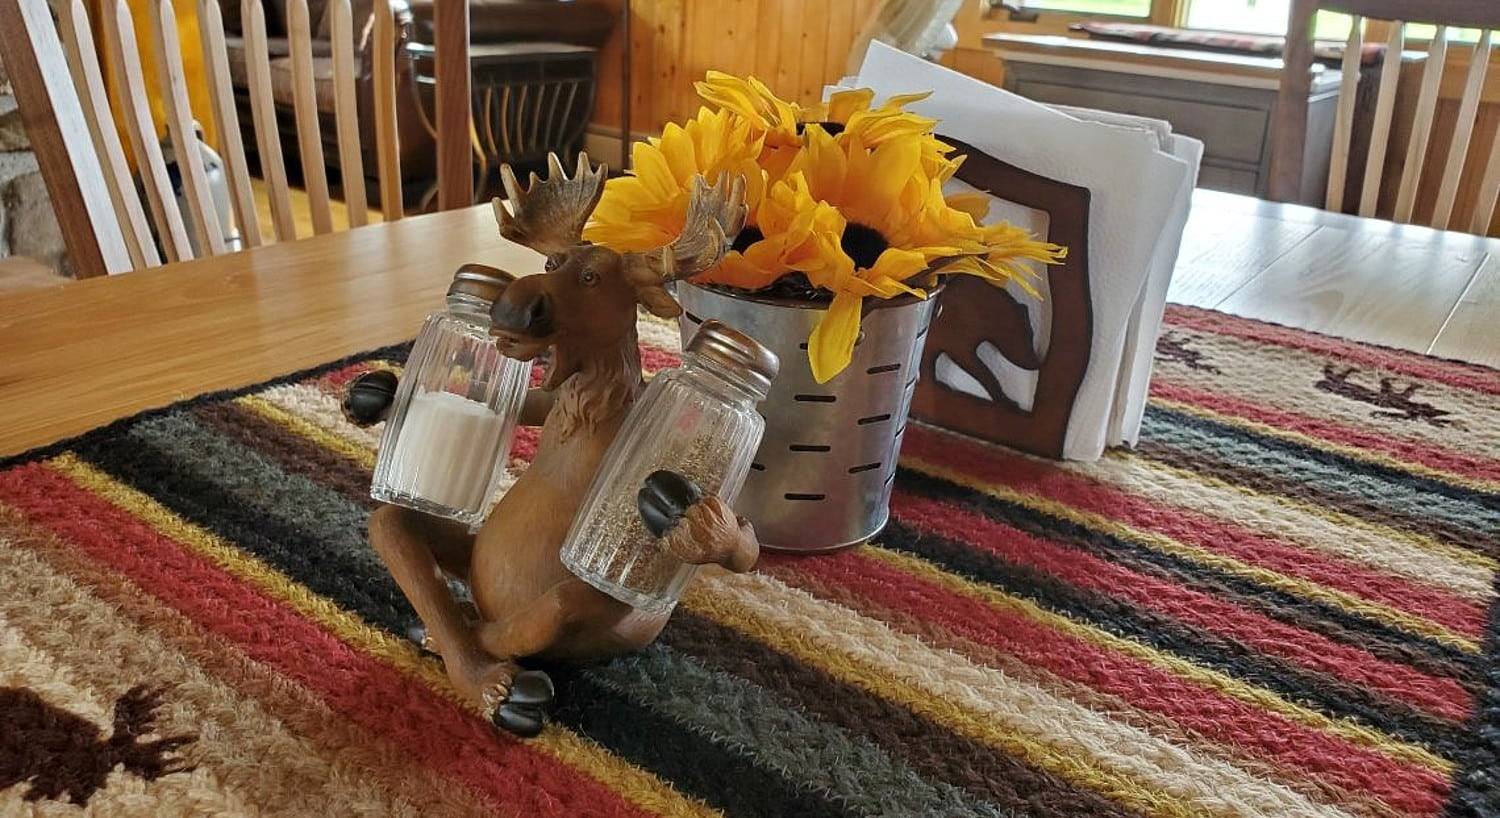 Kitchen table with a moose ornament holding salt and pepper shakers and tin vase with sunflowers